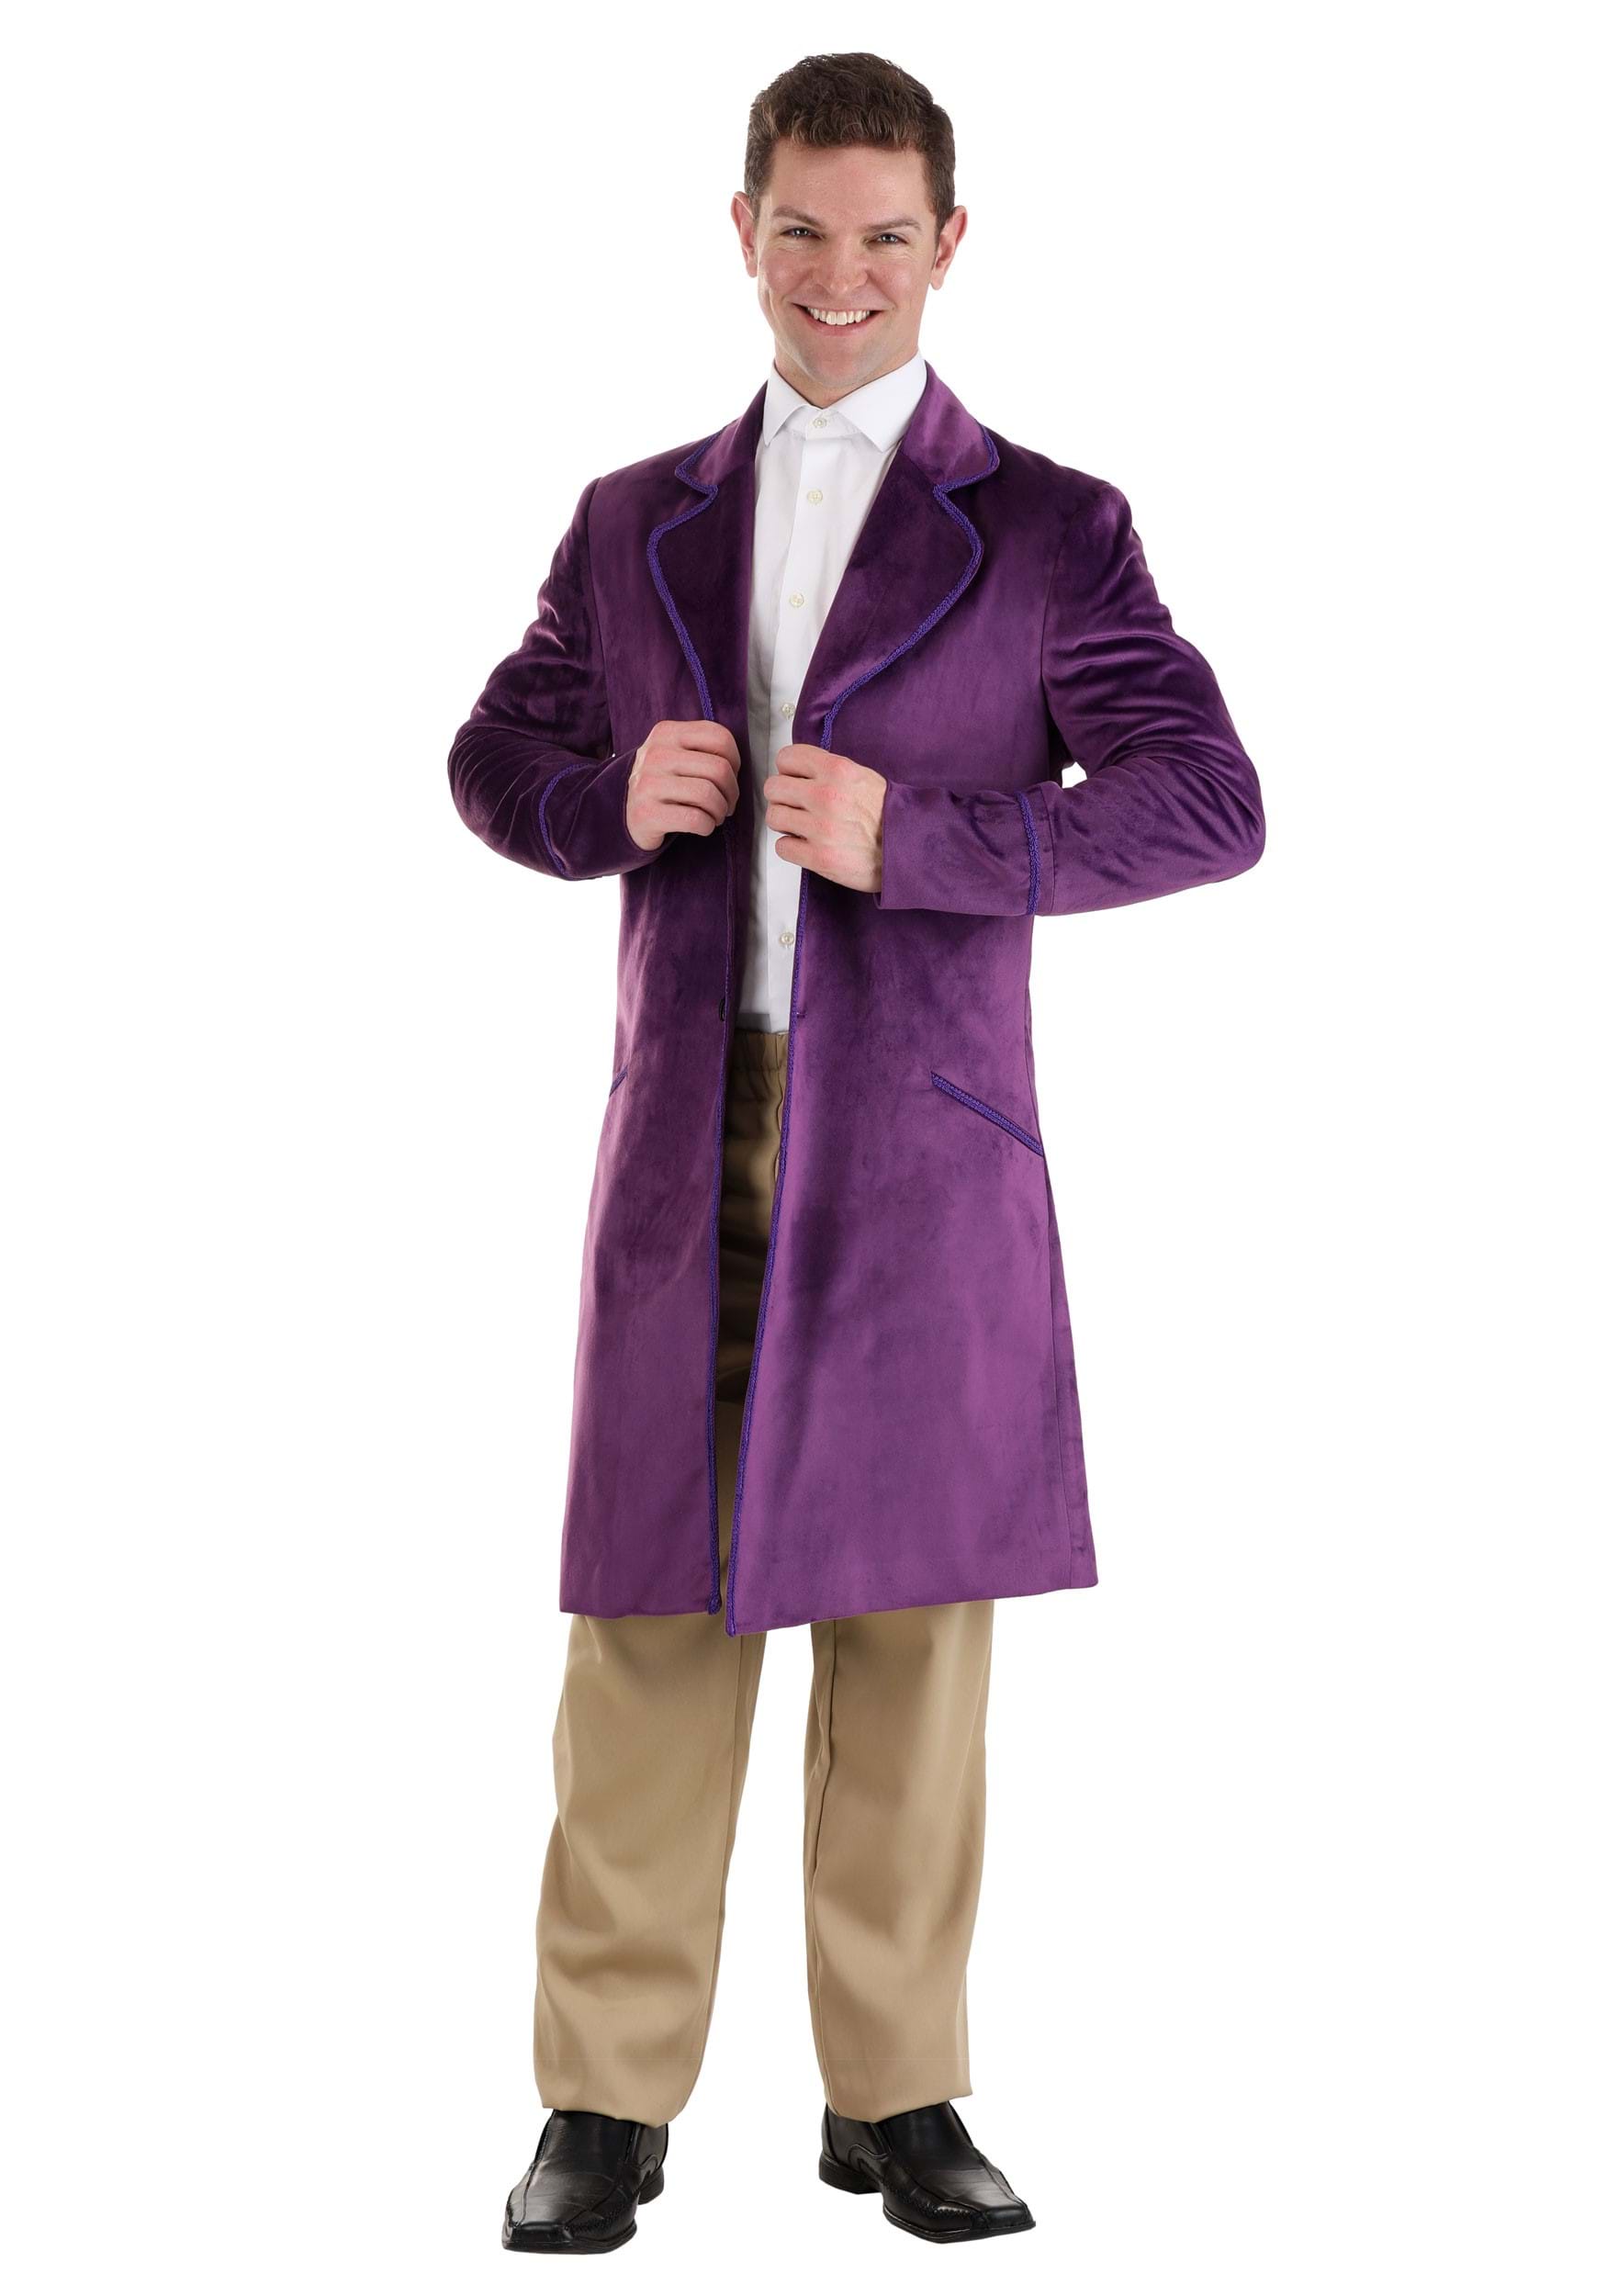 Image of Authentic Willy Wonka Costume Jacket for Men | Willy Wonka Costumes ID FUN1986AD-44